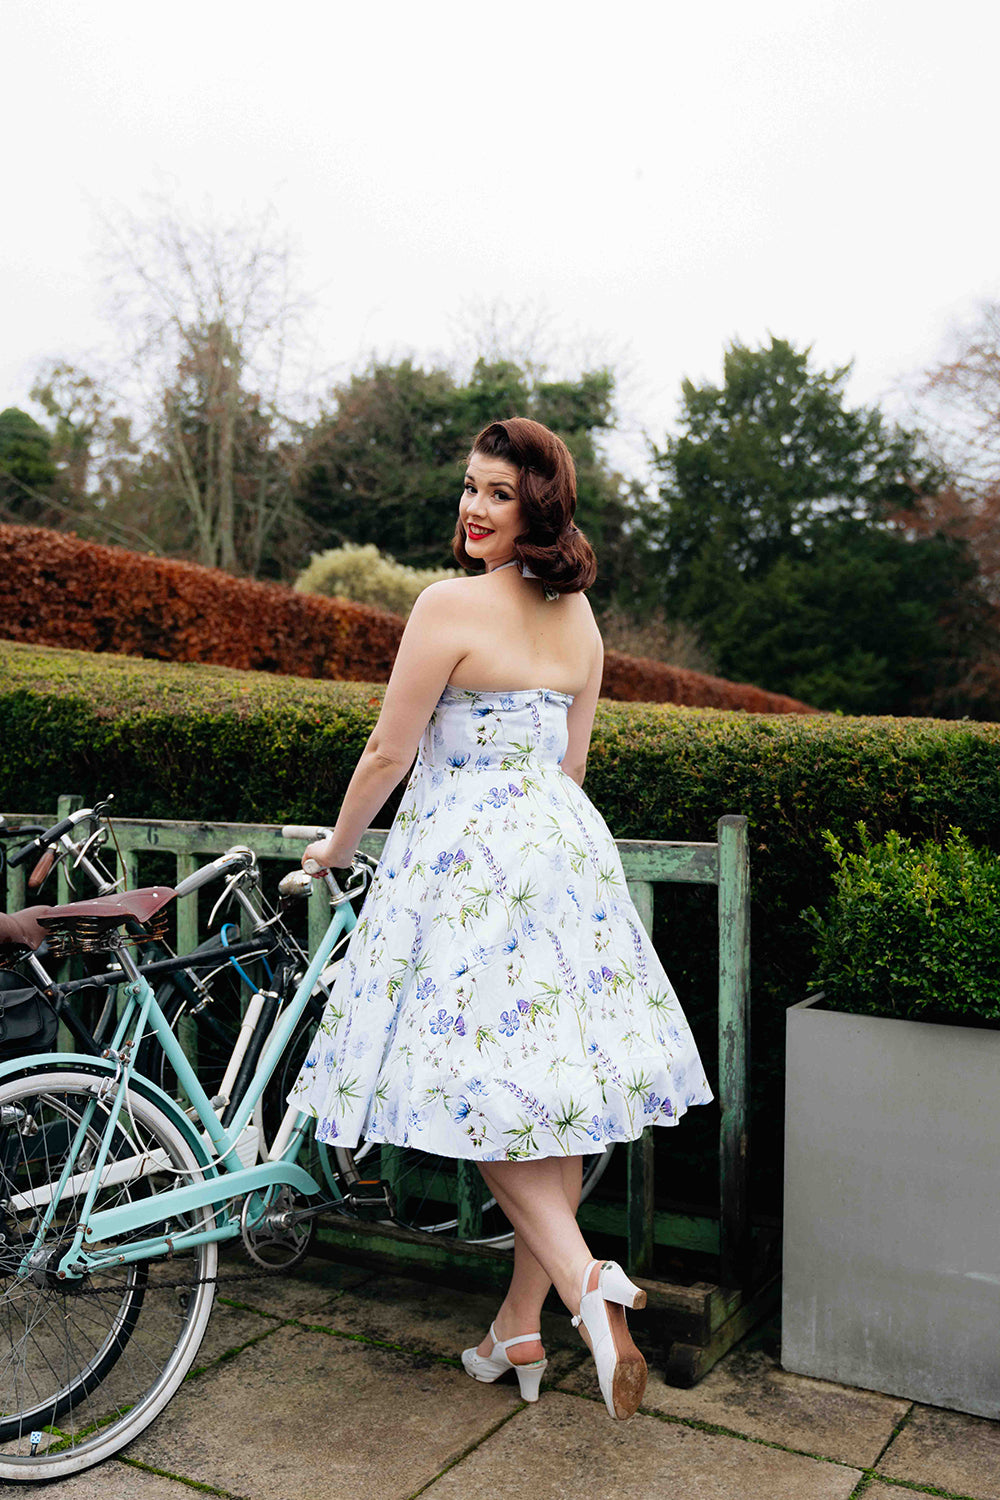 Happy, smiling woman standing next to a bicycle wearing the Bella Swing dress and white heeled shoes